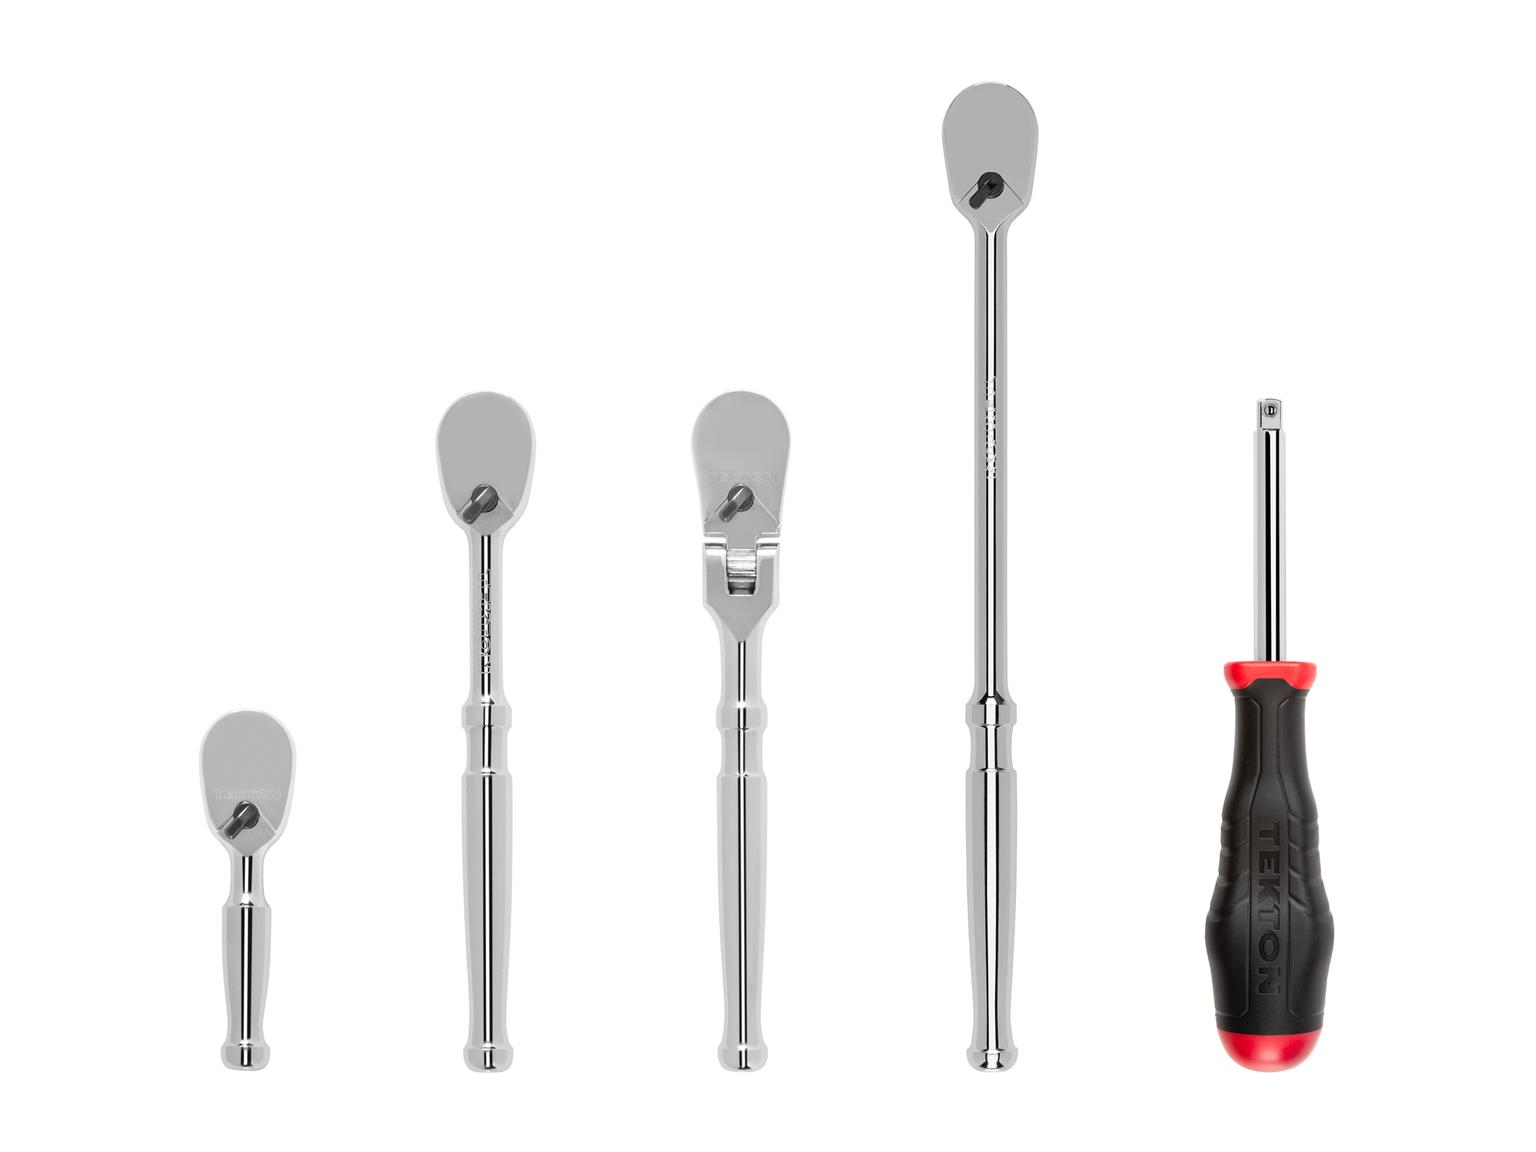 1/4 Inch Drive Ratchet and Spinner Handle Set (5-Piece)